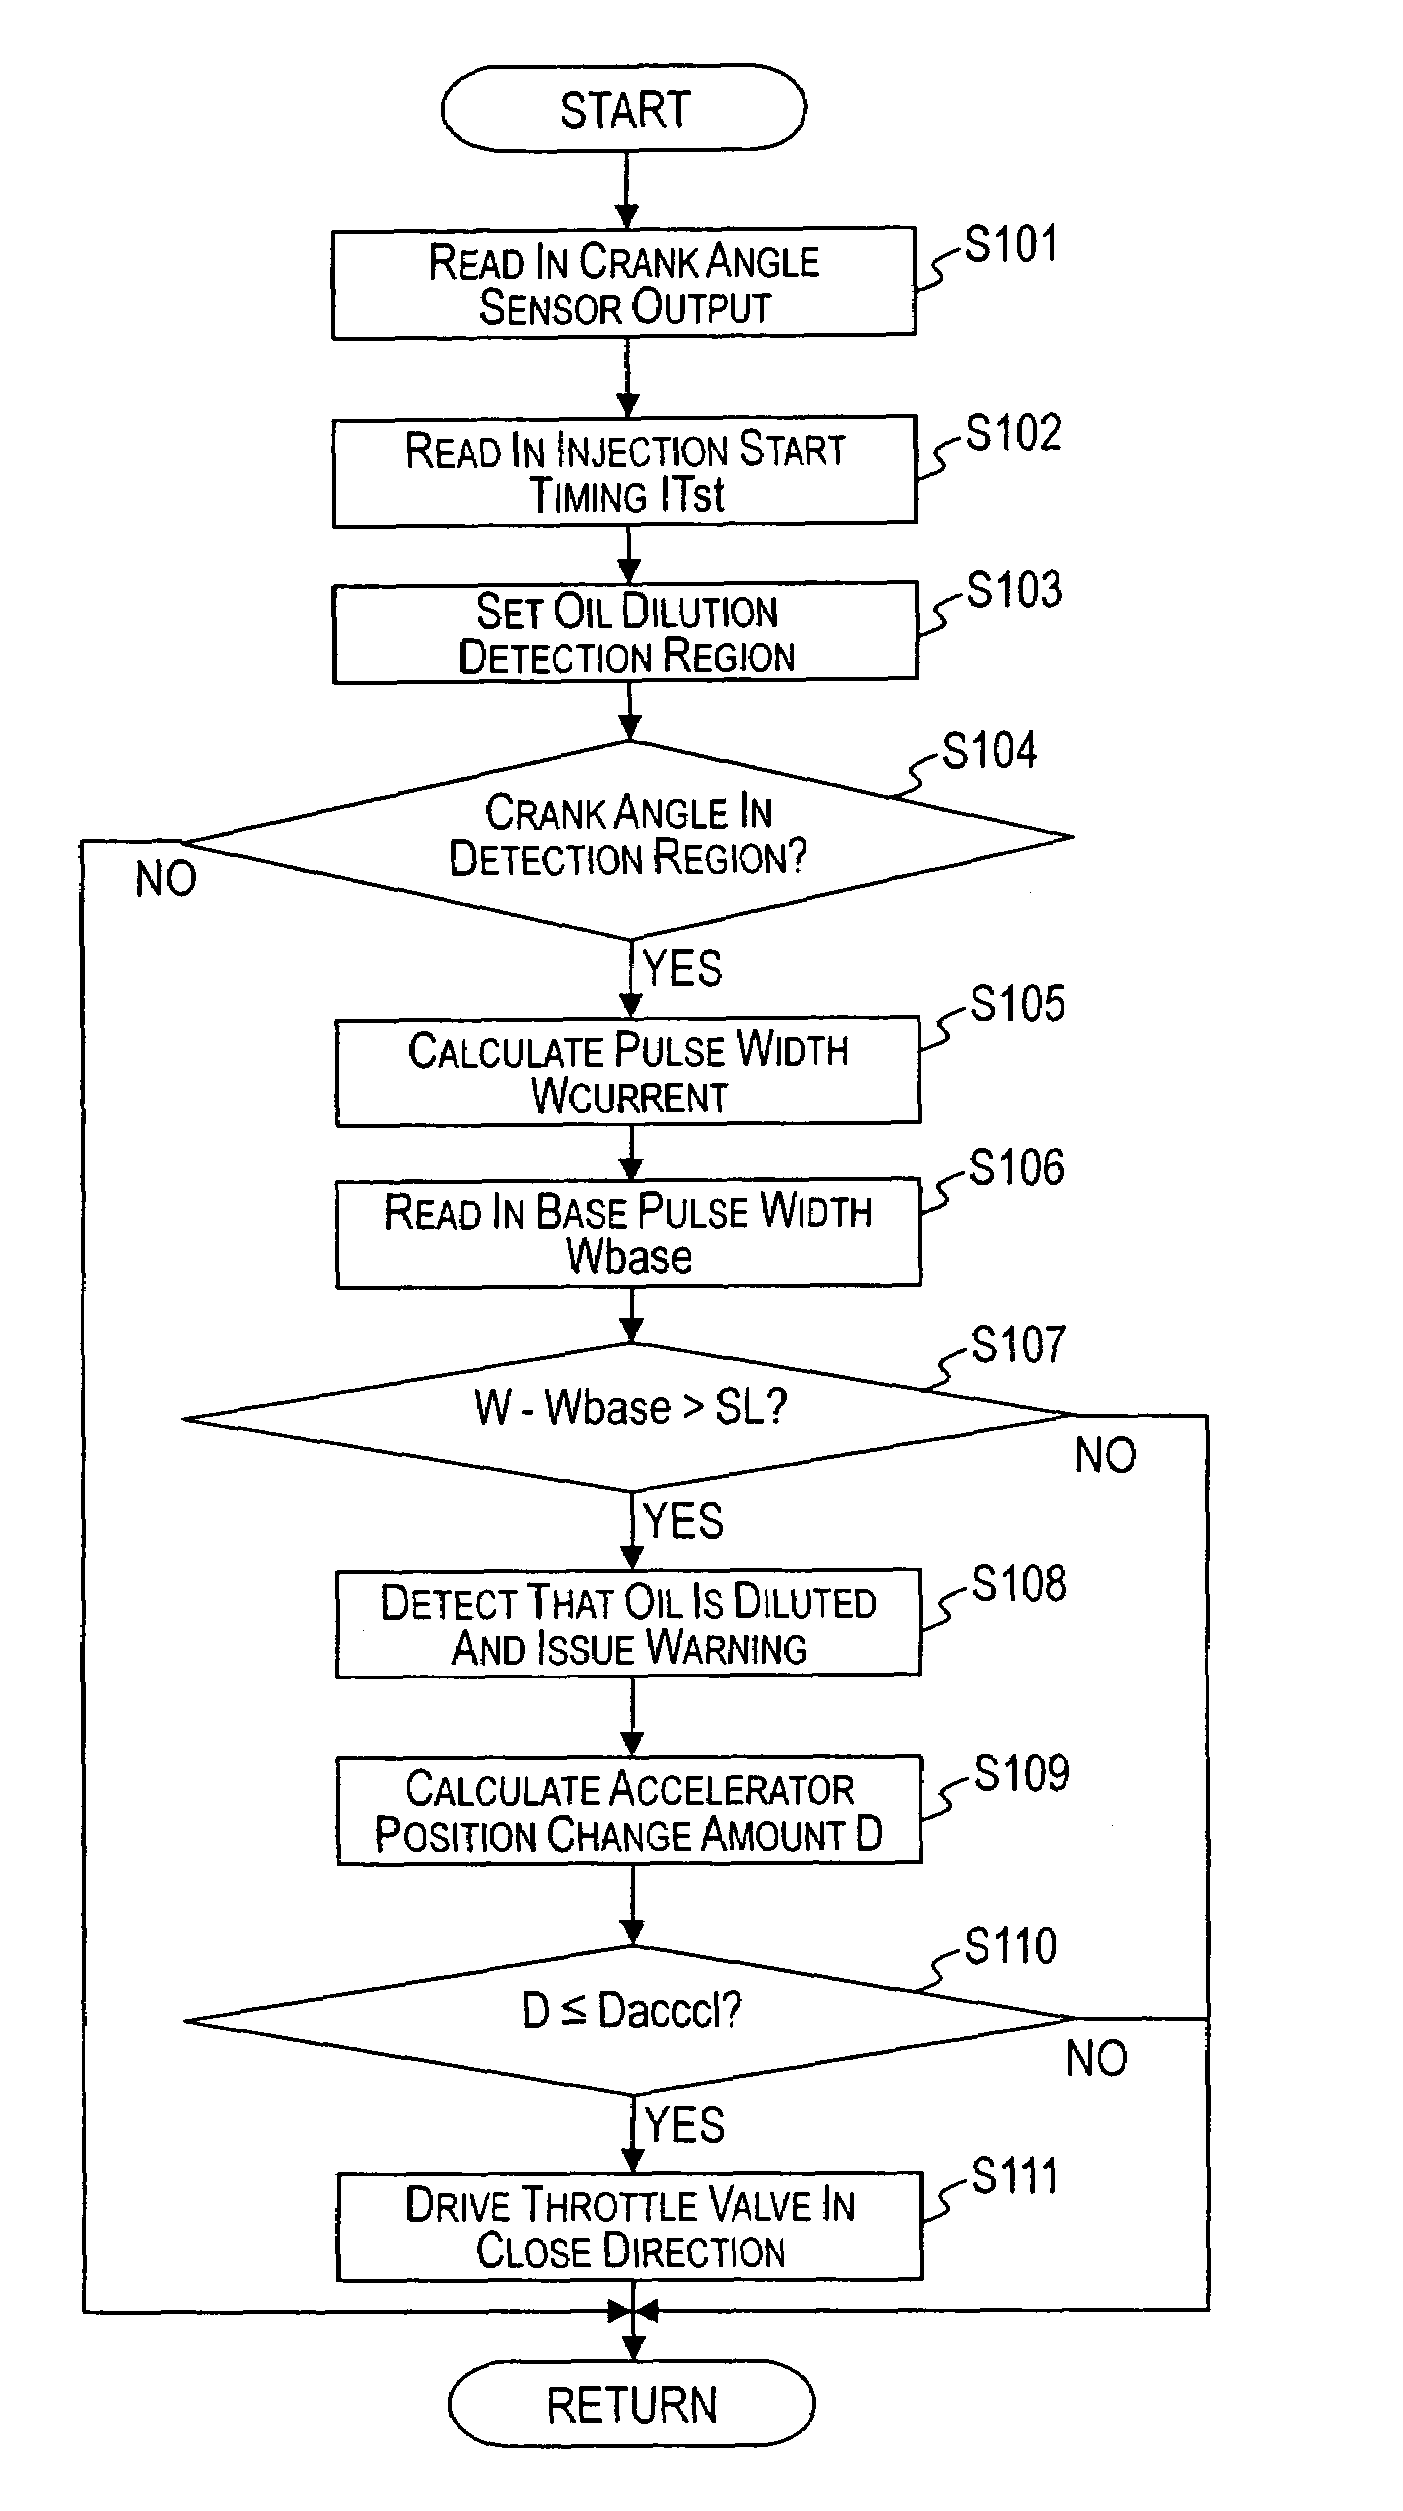 Diesel engine oil dilution managing device